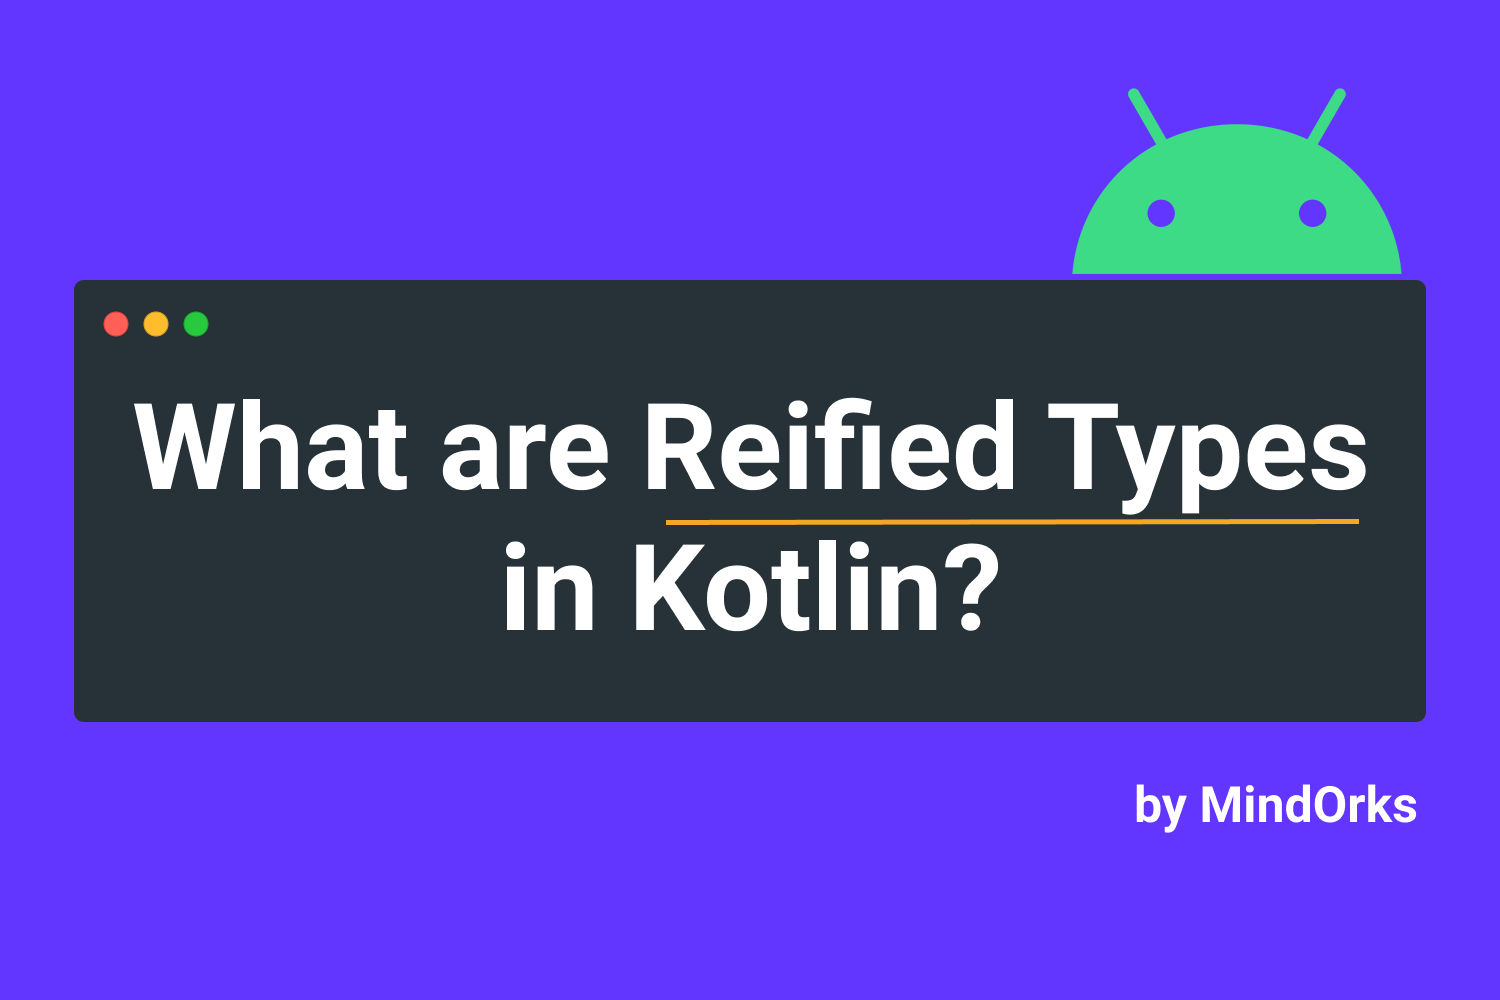 What are Reified Types in Kotlin?